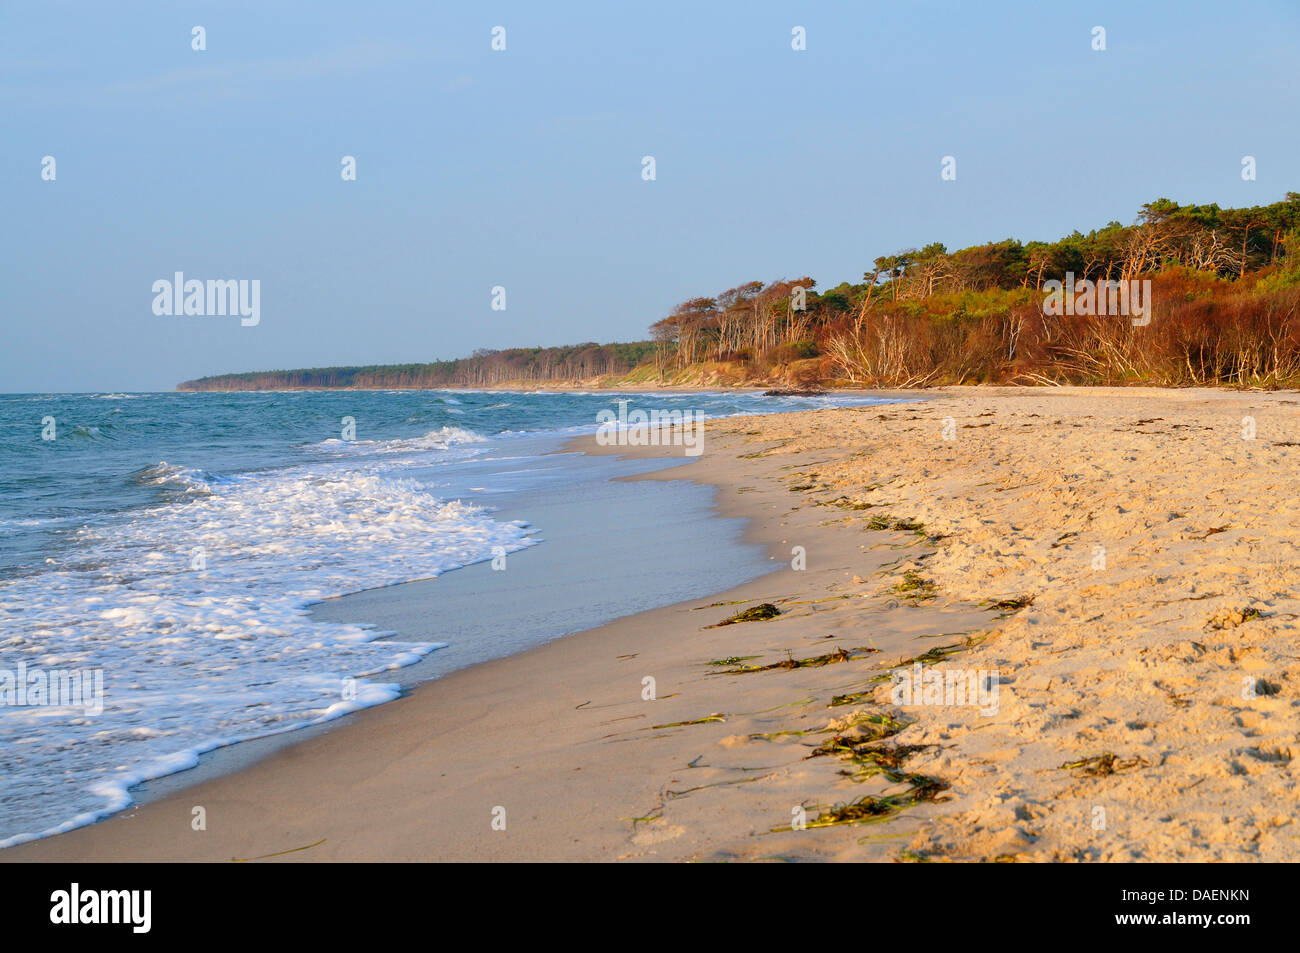 panoramic view in the Vorpommersche Boddenlandschaft National Park along the sand beach of the Baltic Sea, Germany, Mecklenburg-Western Pomerania, Nationalpark Vorpommersche Boddenlandschaft Stock Photo